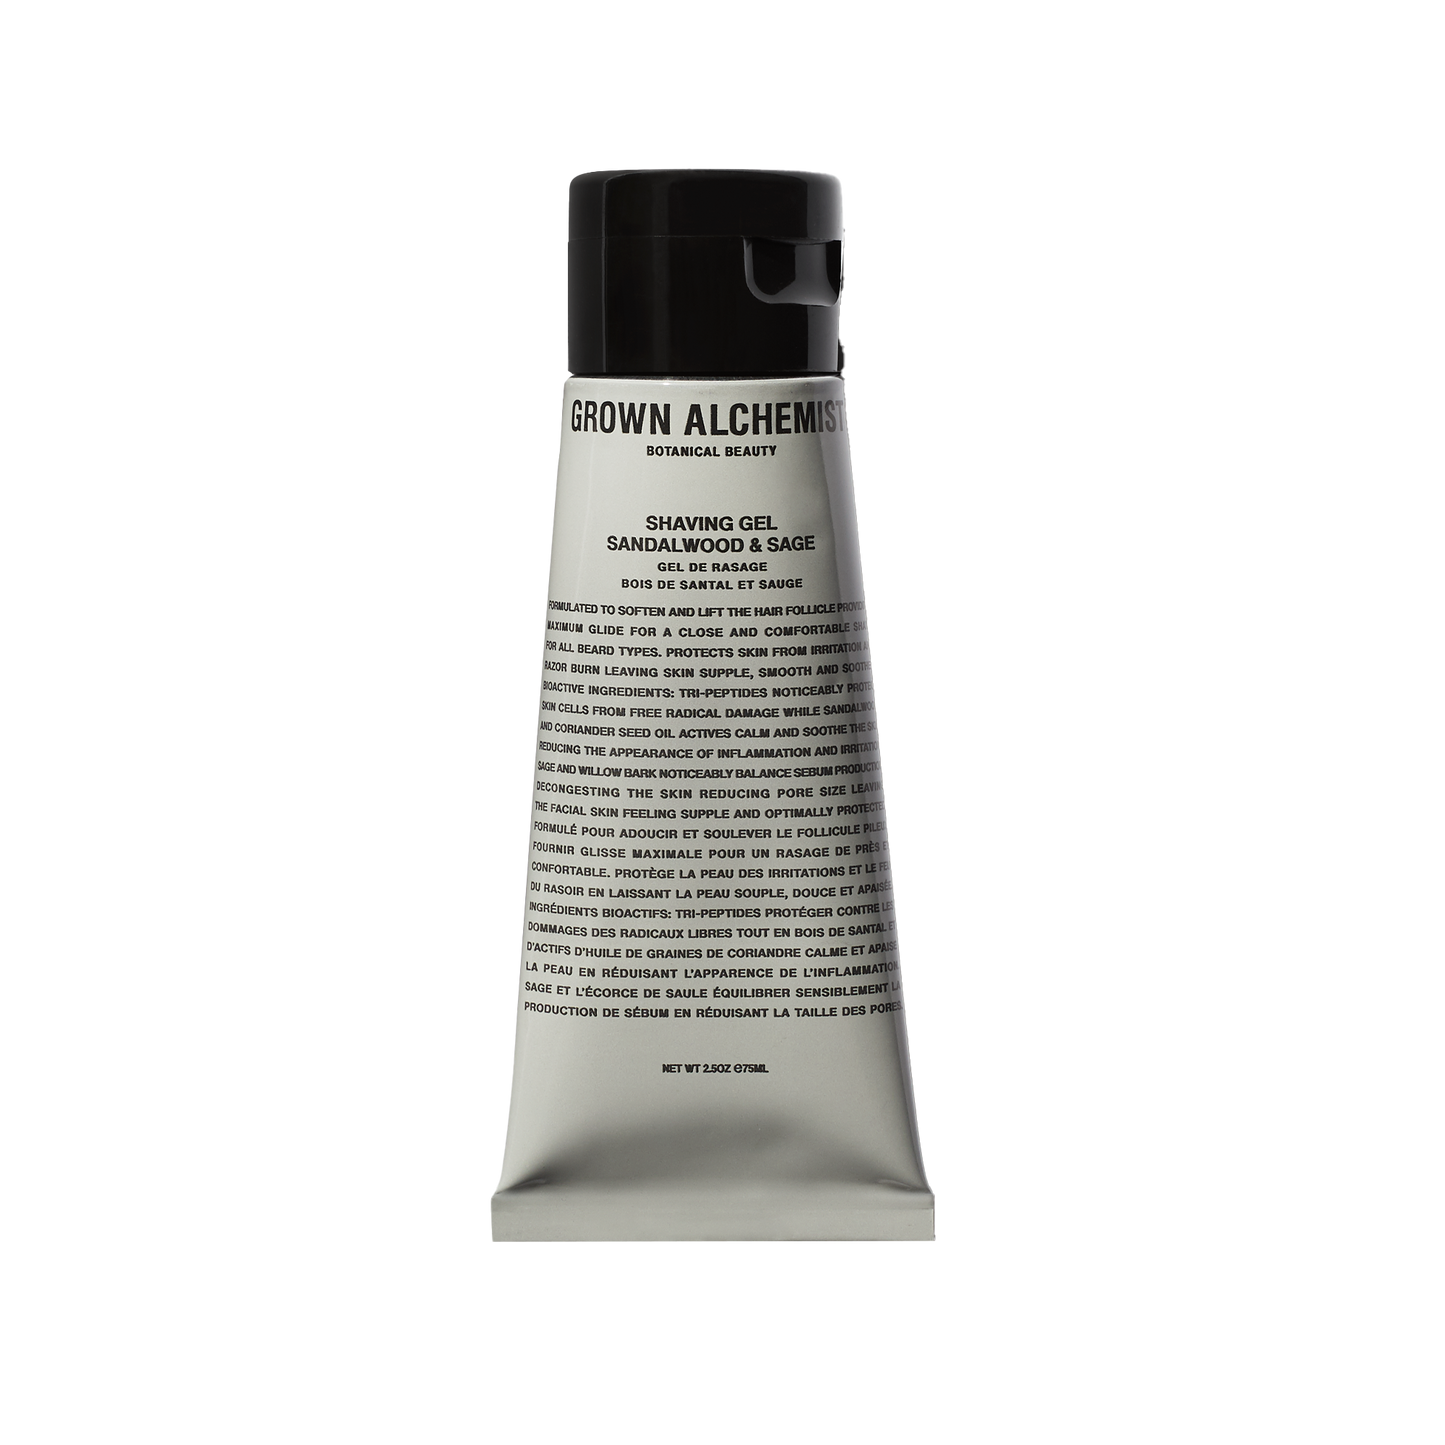 Grown Alchemist Shaving Gel: Formulated to soften and lift the hair follicle, providing maximum glide for a close and comfortable shave, protecting skin from irritation and razor burn, leaving skin supple, smooth and soothed.